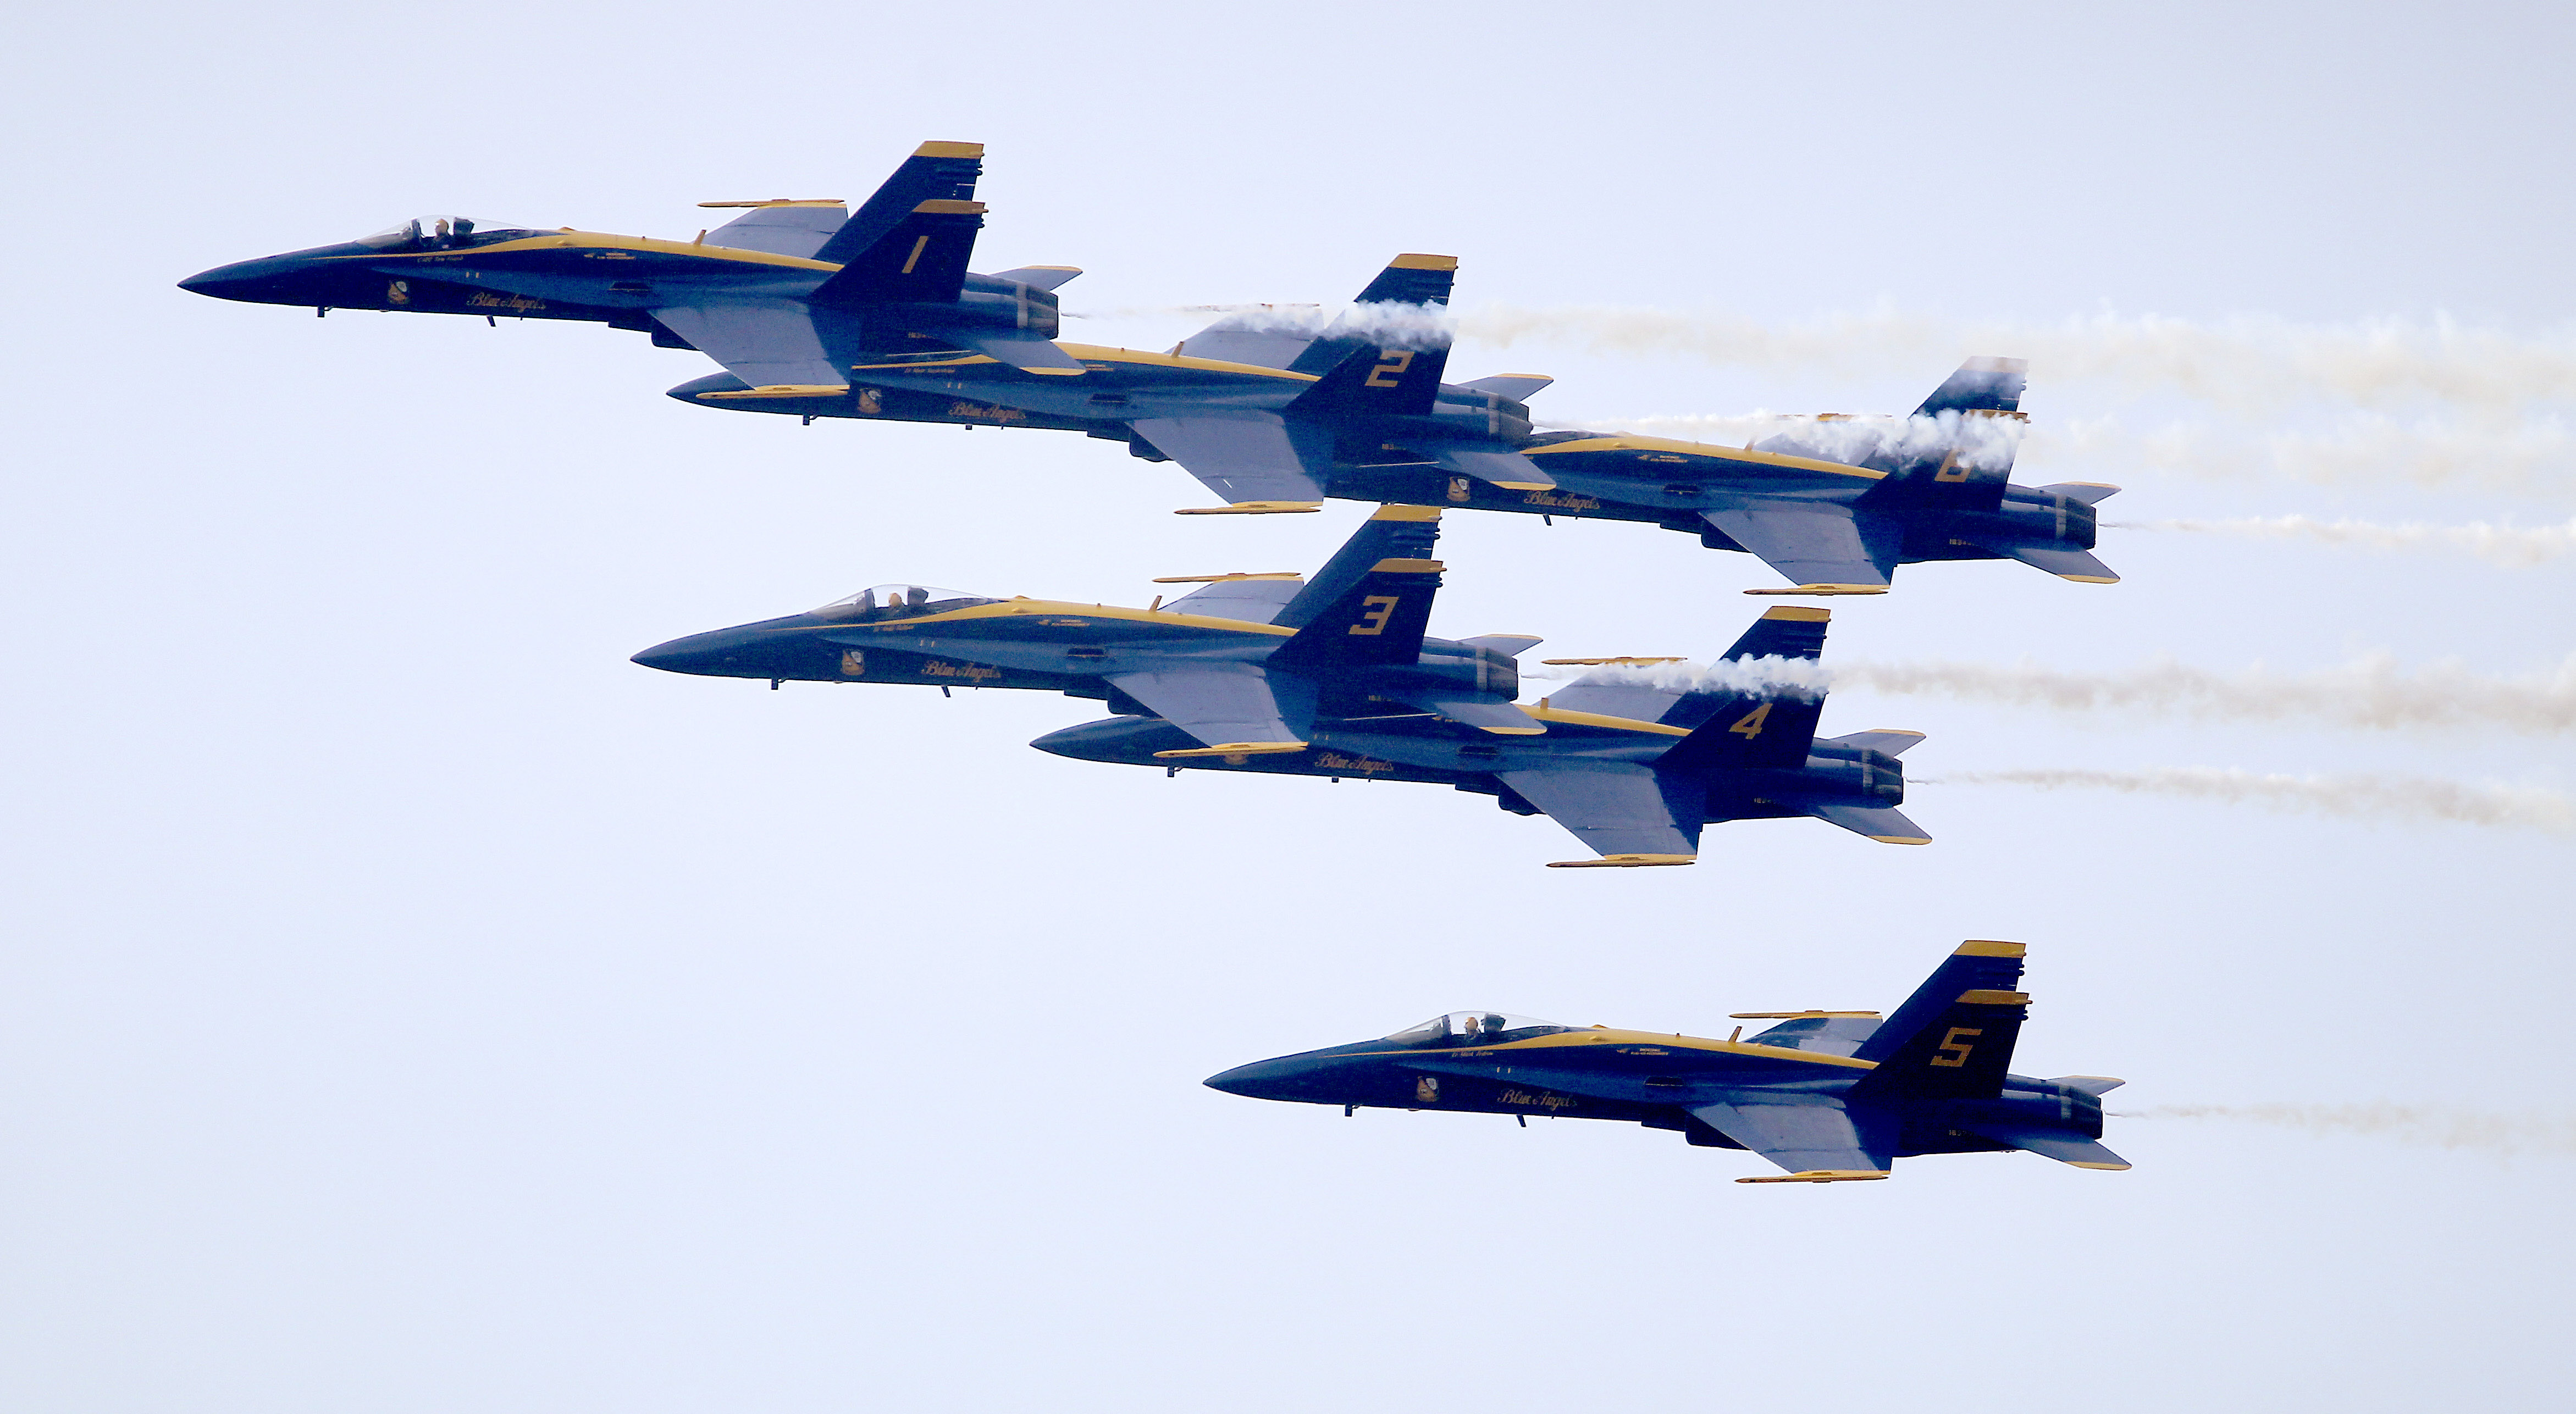 Local Blue Angels flights may impact your drive